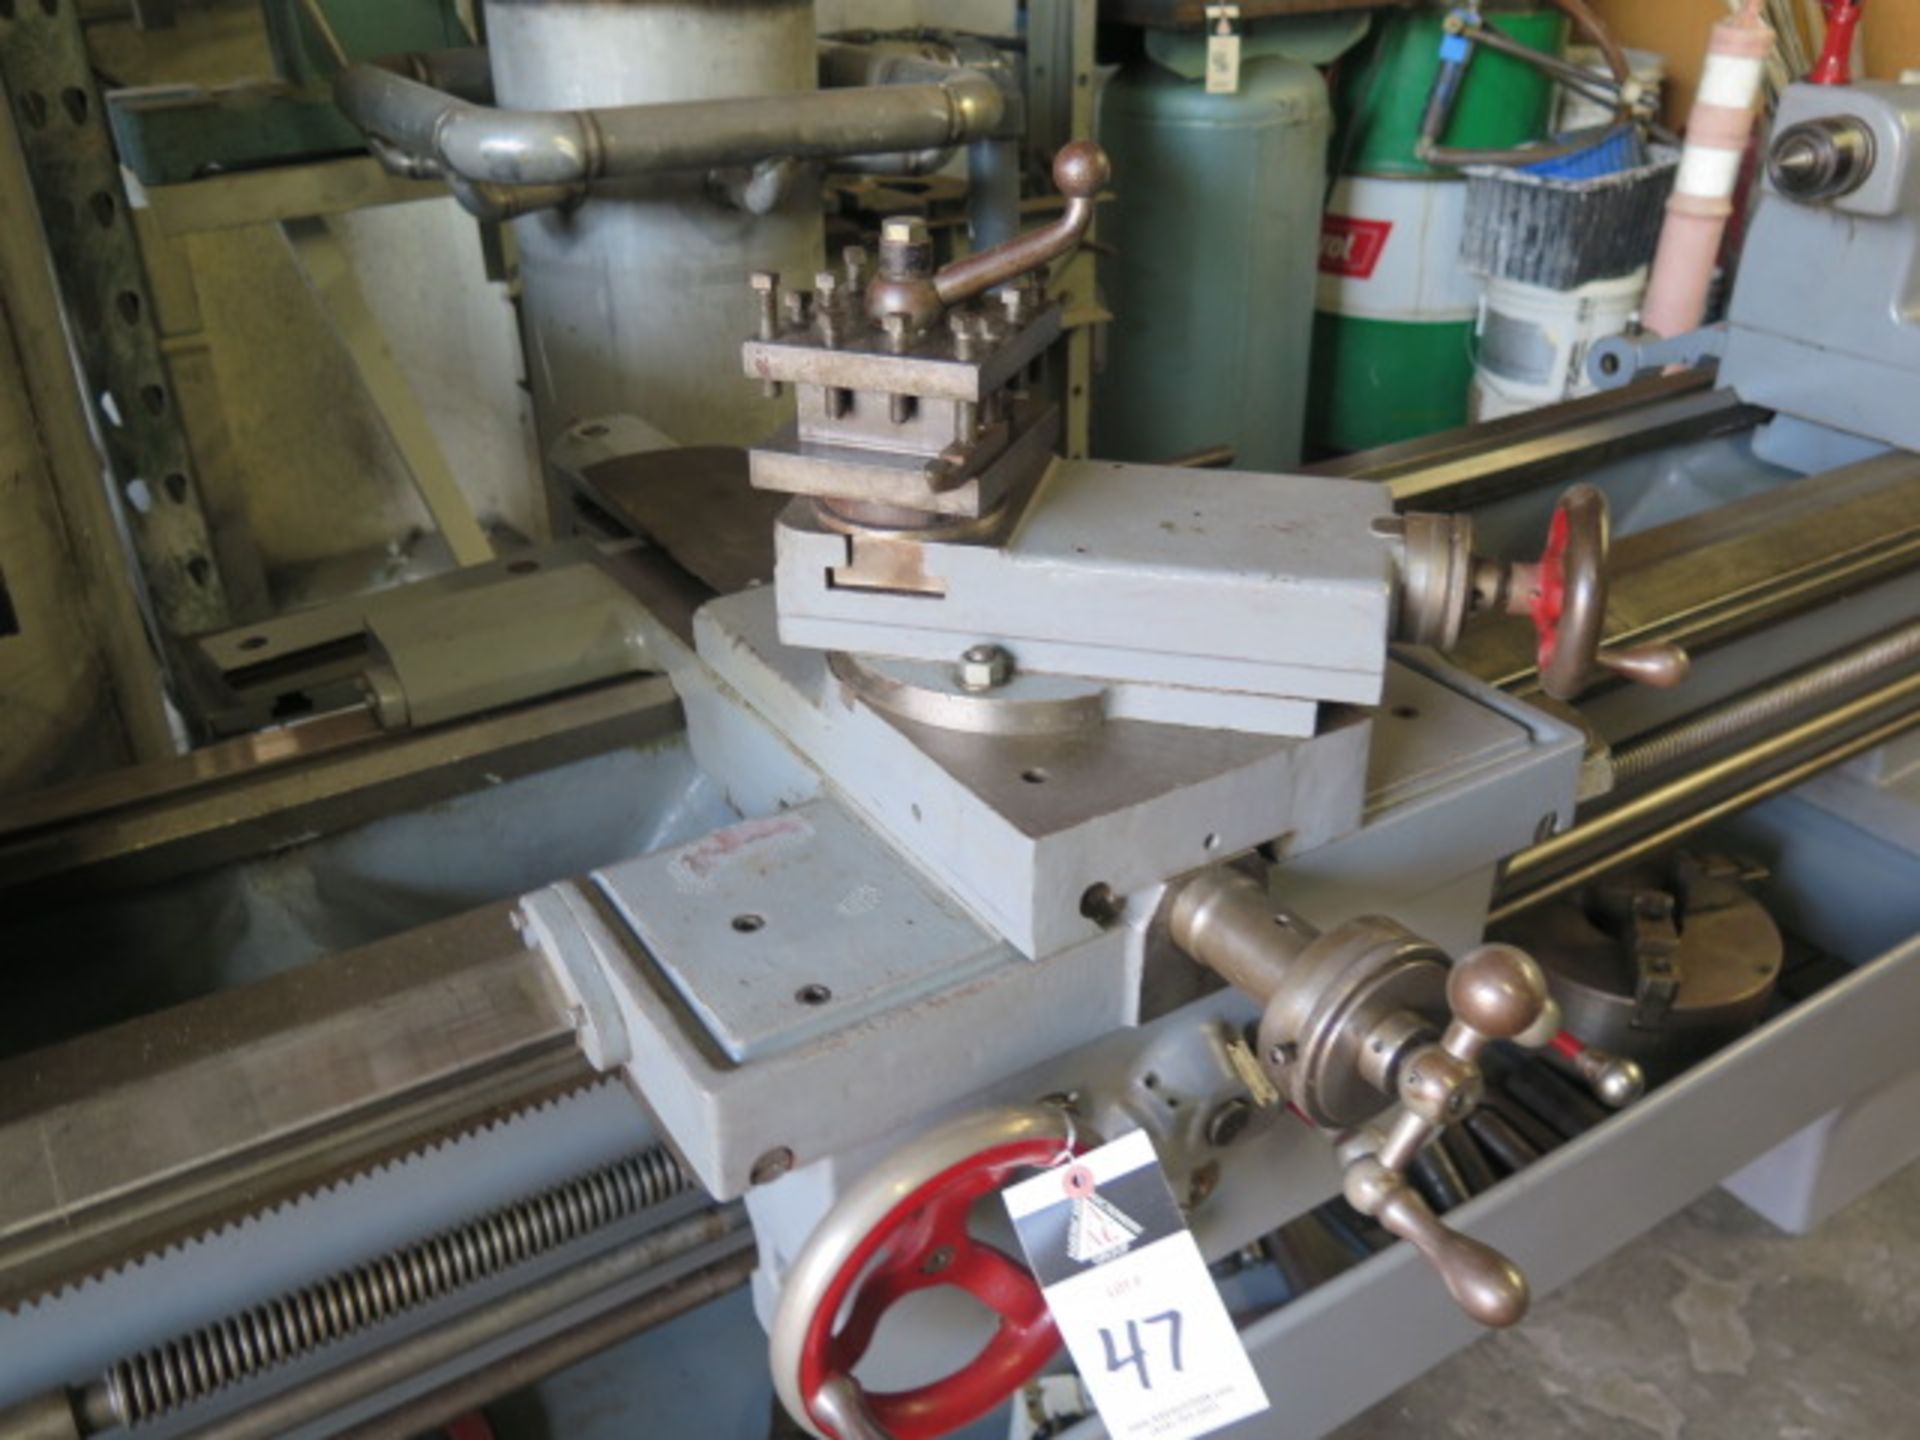 LeBlond Regal 19” x 56” Lathe s/n 2E72 w/ 38-1500 RPM, Inch Threading, Taper Attachment, SOLD AS IS - Image 8 of 12